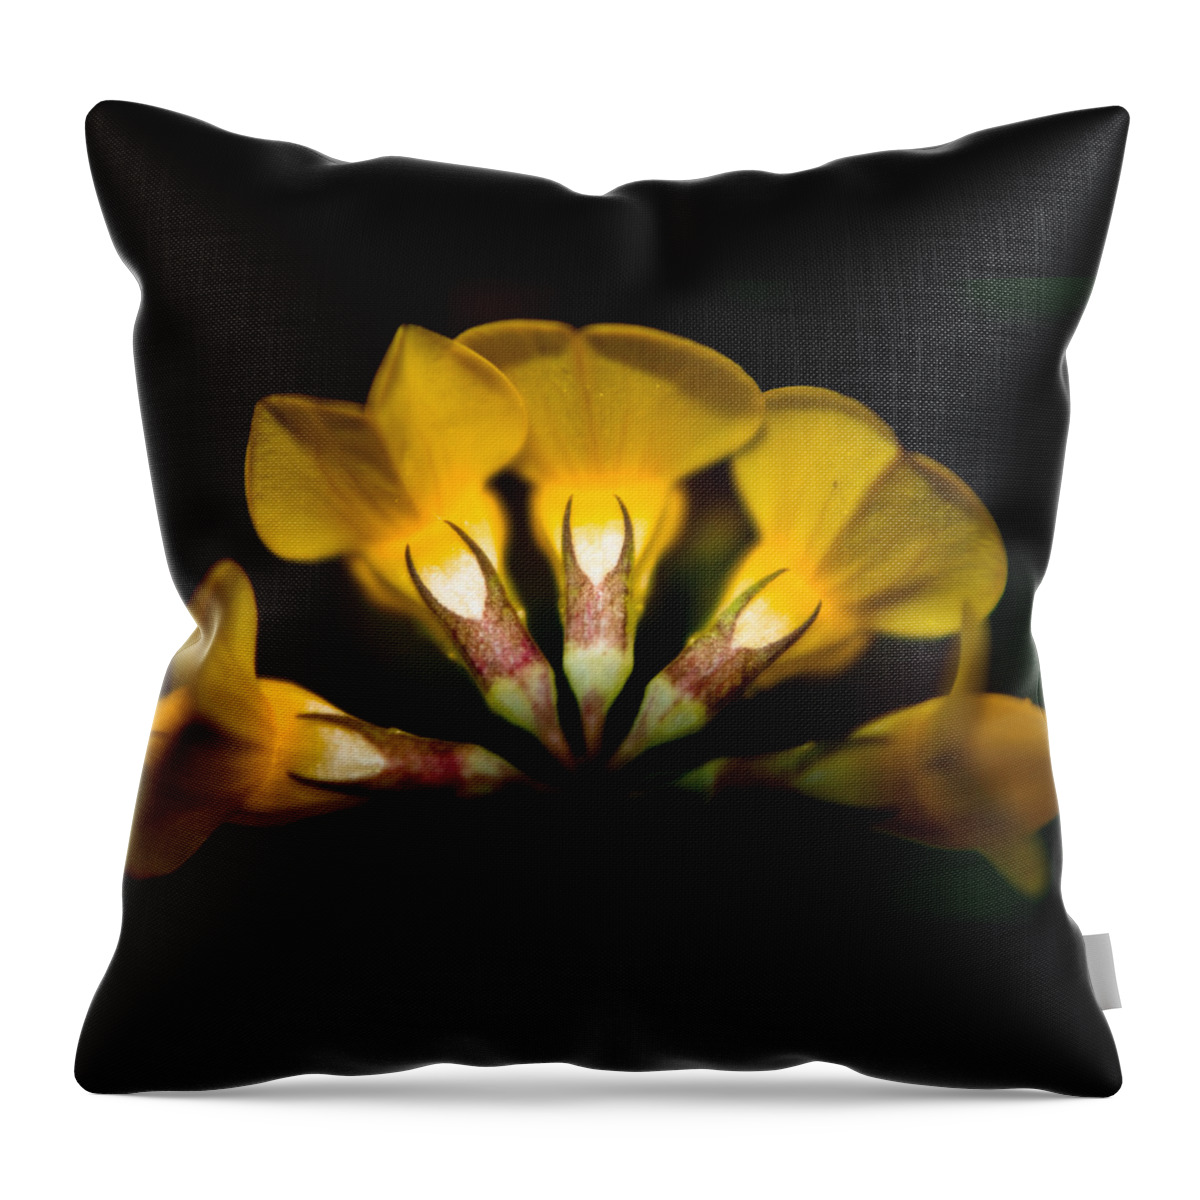 Adria Trail Throw Pillow featuring the photograph Flower Candelabra by Adria Trail